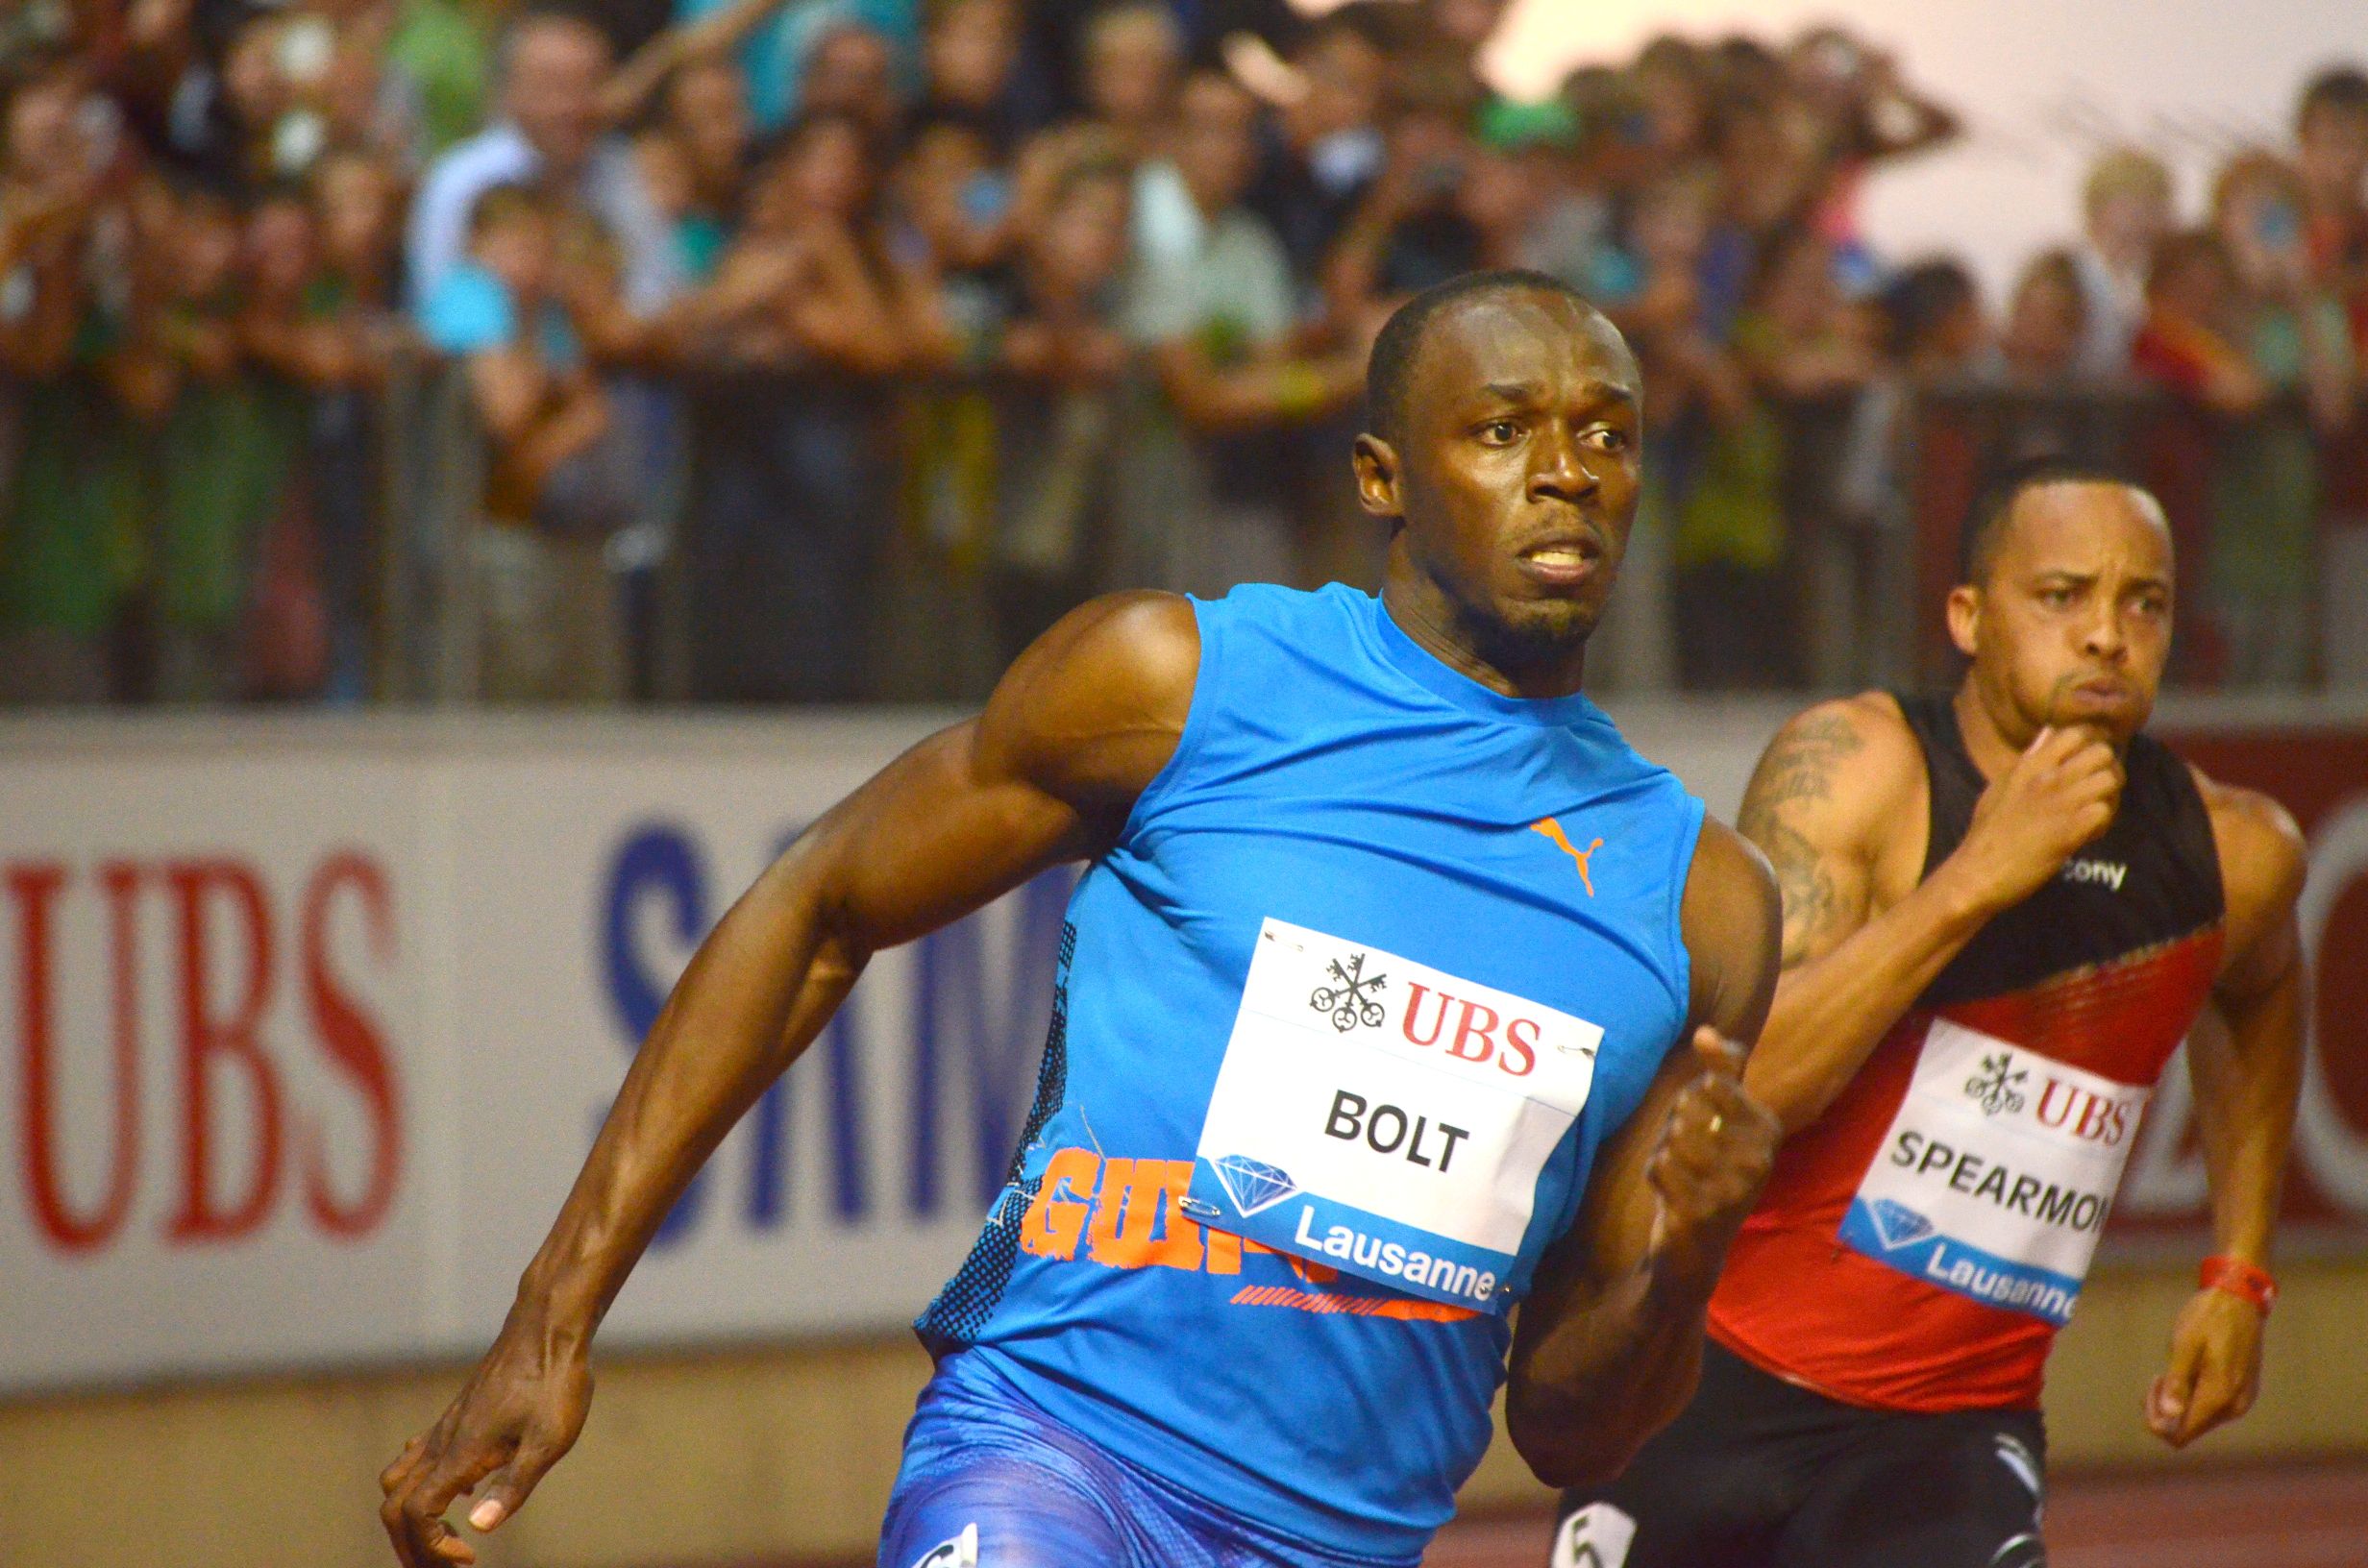 Usain runs meeting record of 19.58 in Lausanne